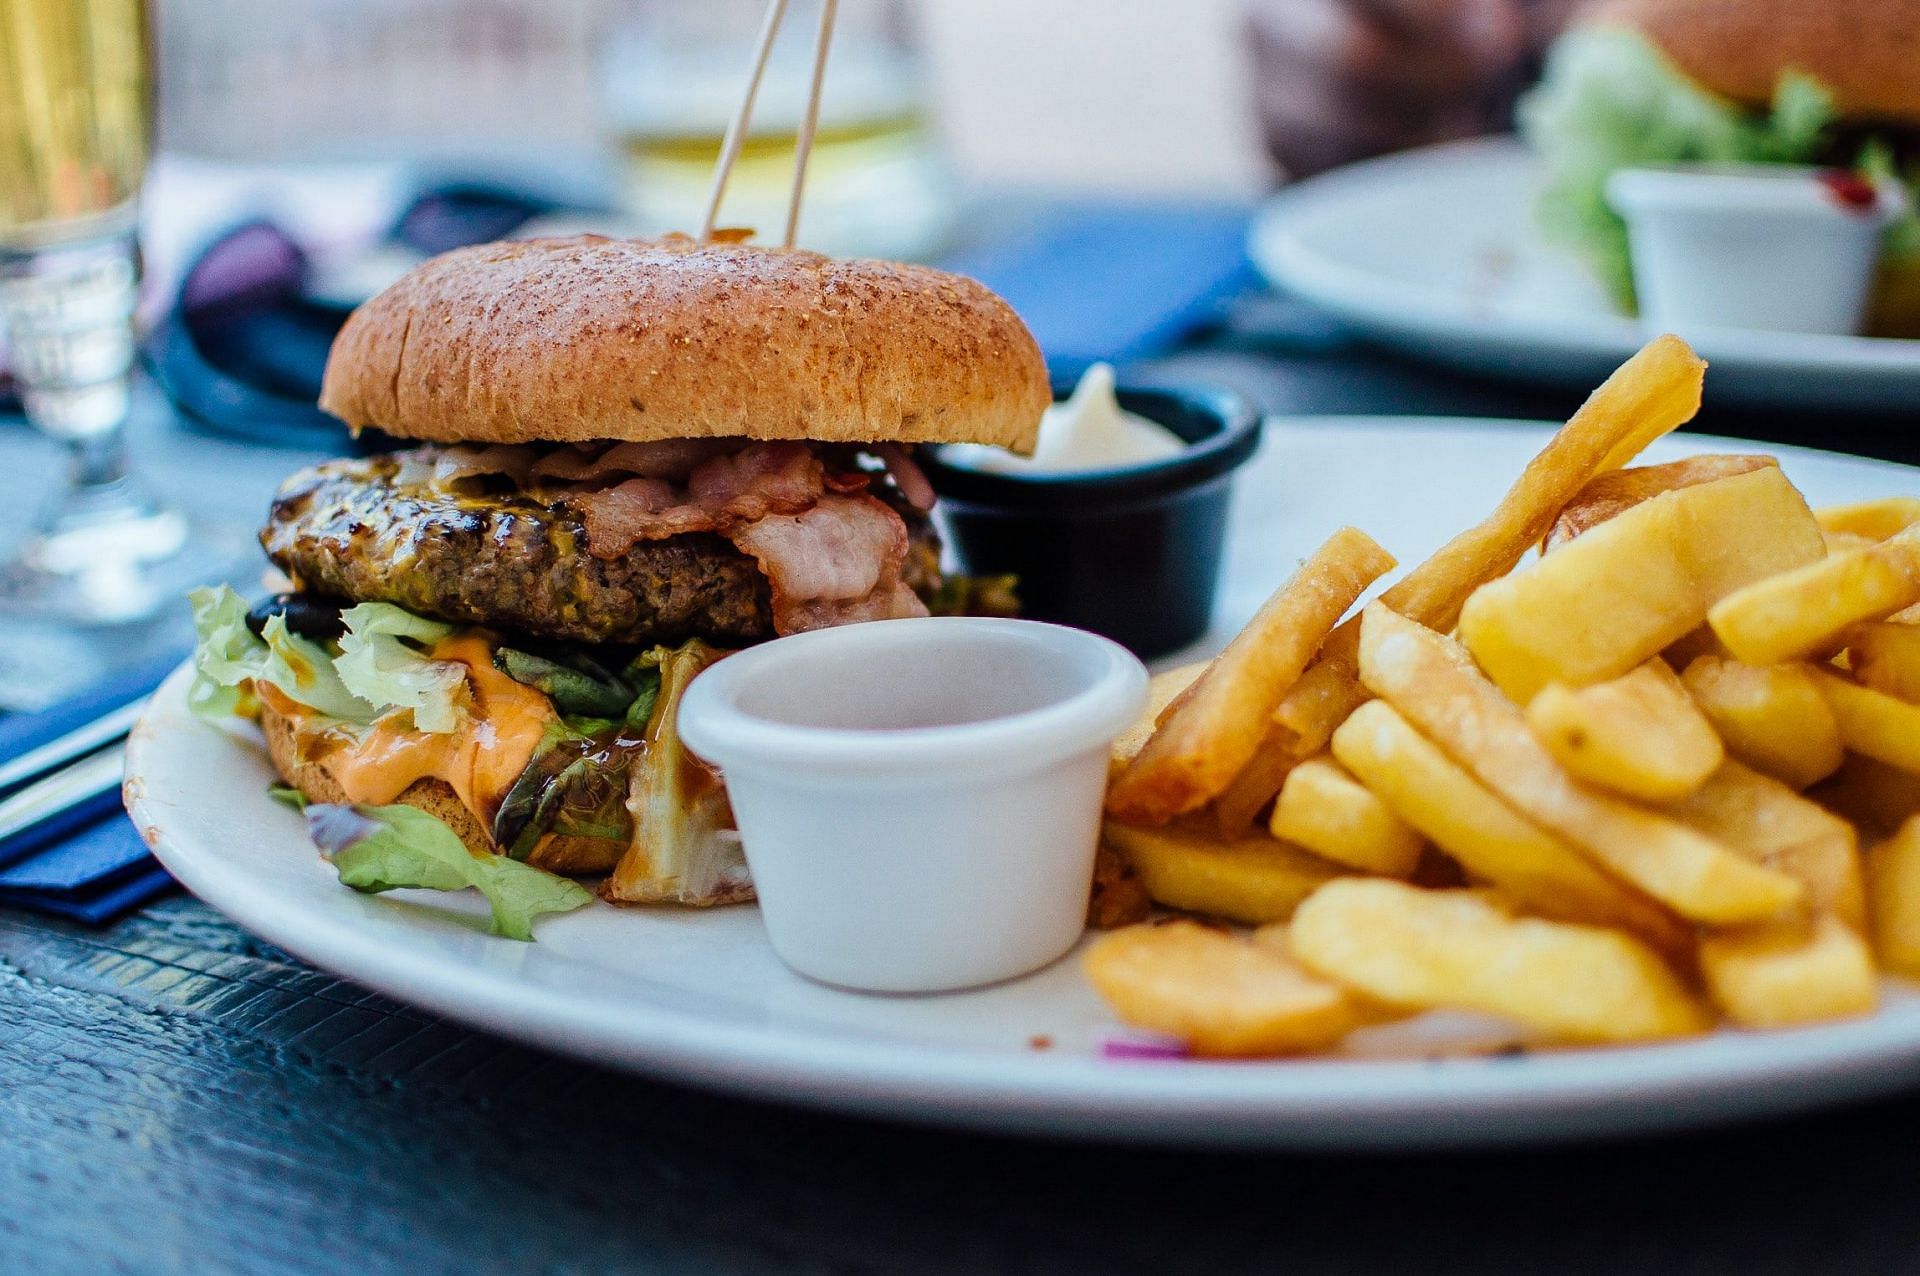 Cheat meals can be included in your diet with proper planning (Image via Unsplash/Robin Stickel)